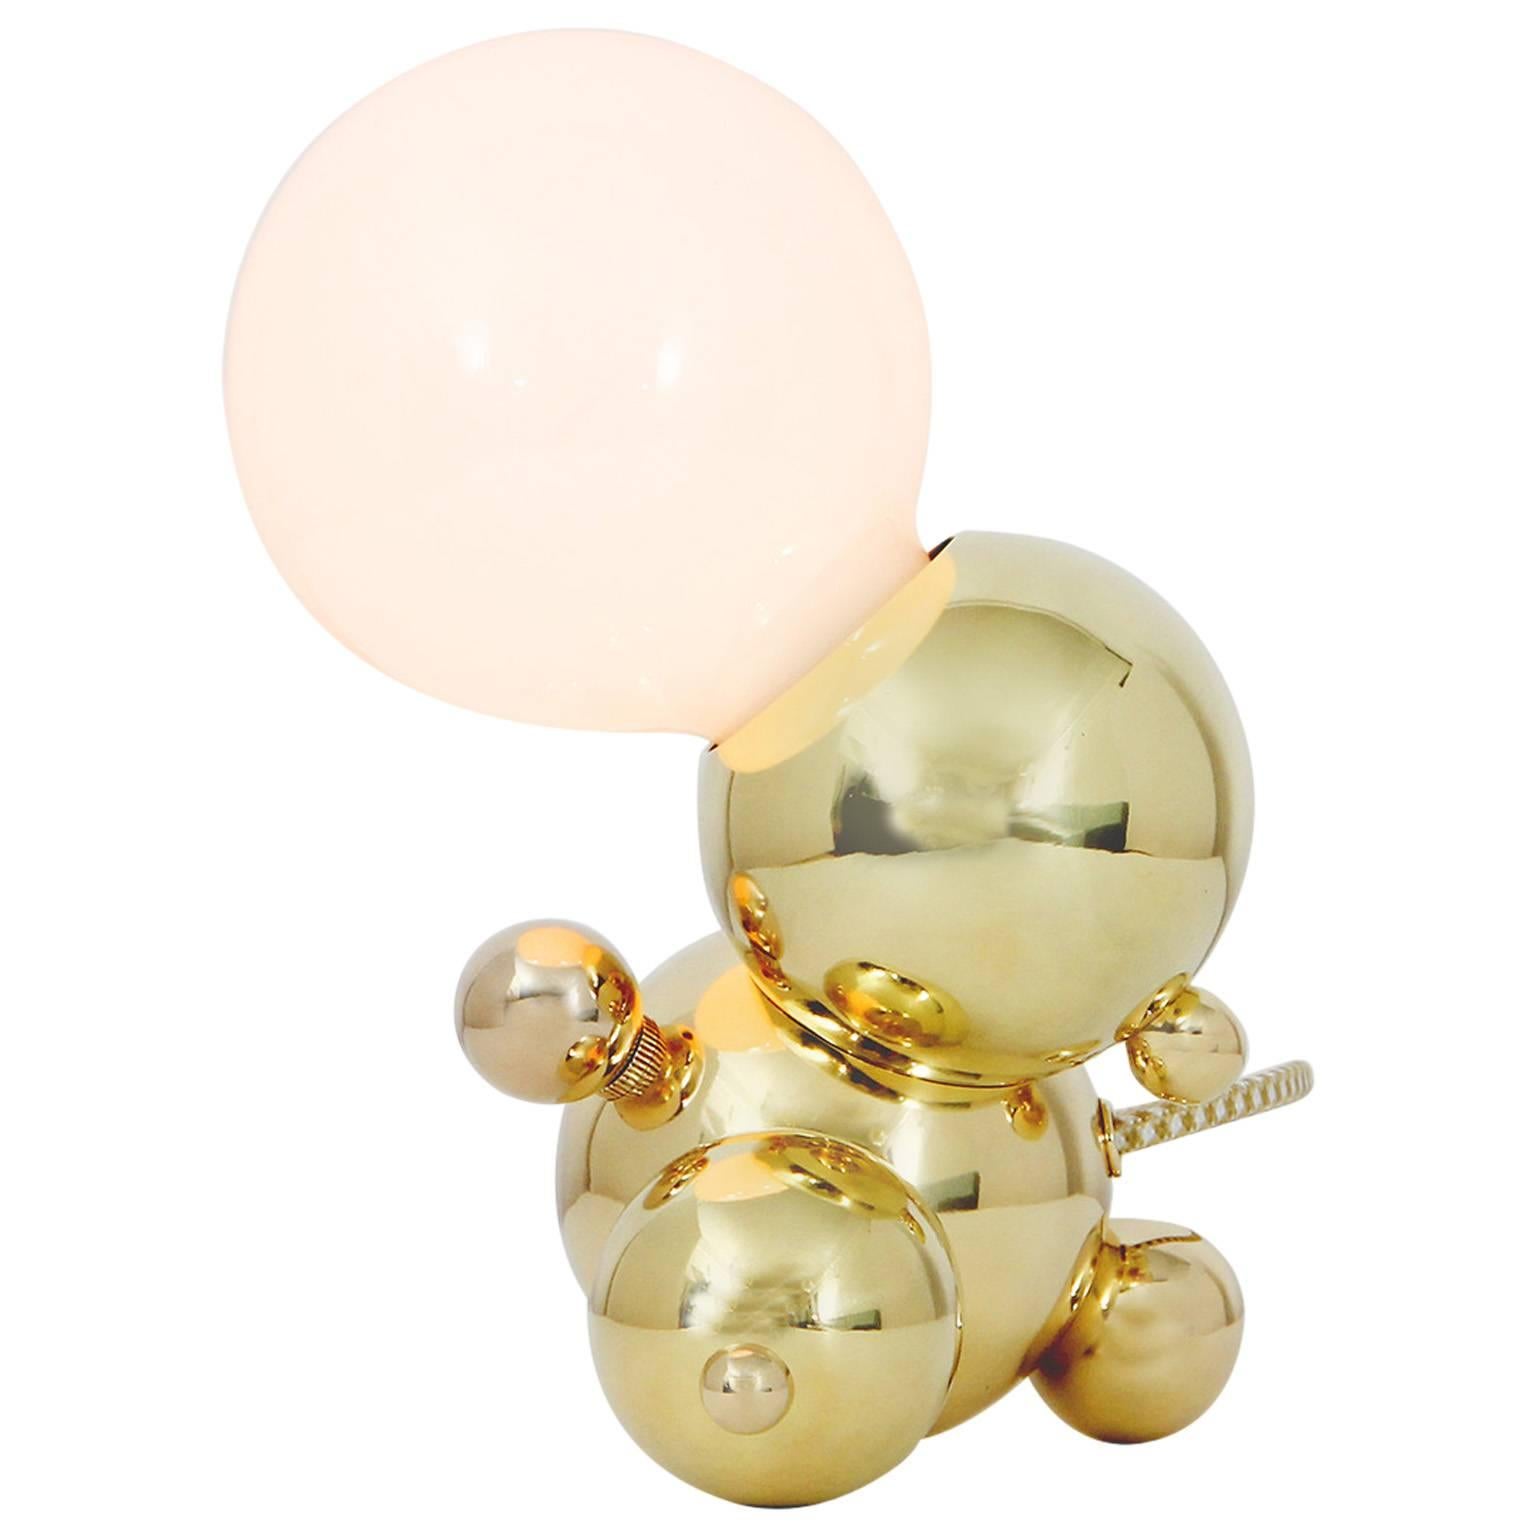 Bubbly 01-Light Small Sculptural Table or Desk Lamp in Polished Brass